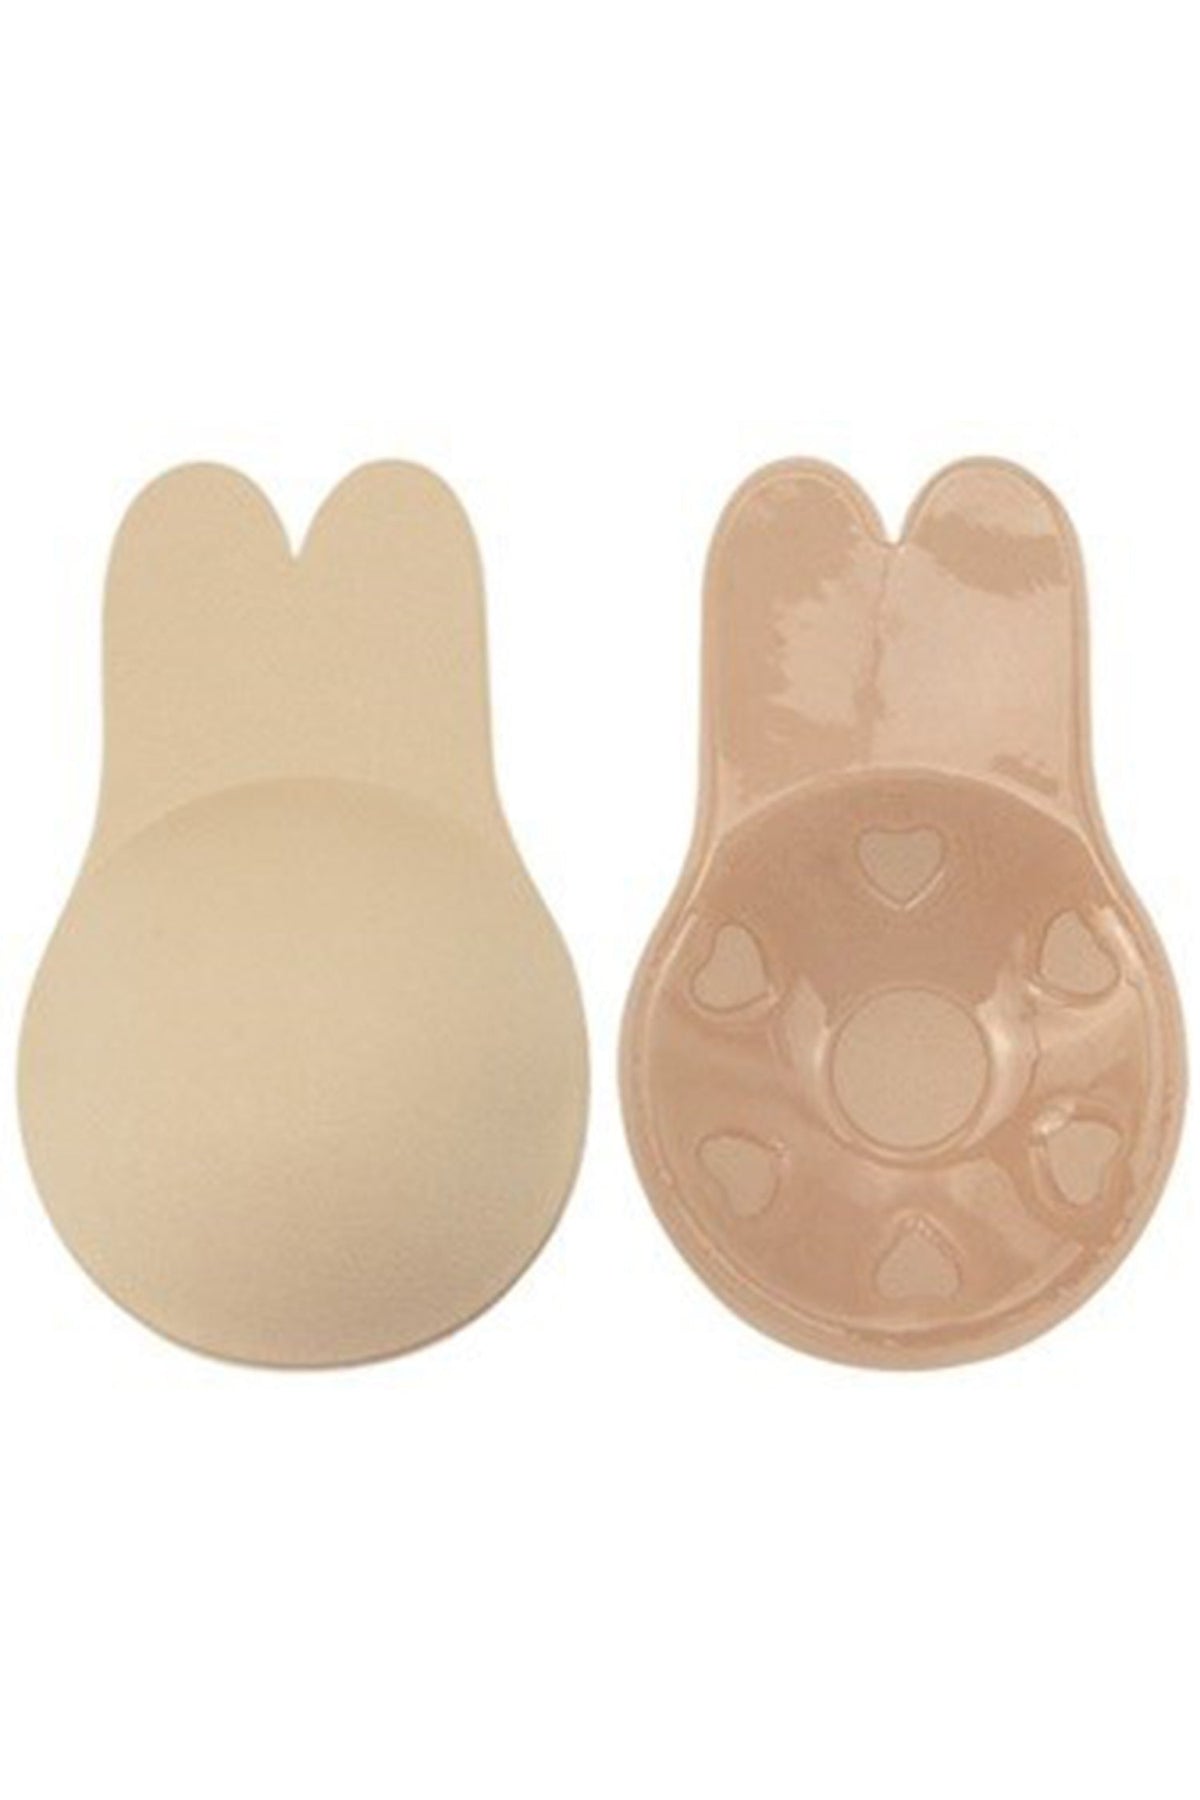 Boobie Bunnies - Fabric Breast Lifts, Afterpay, Zip Pay